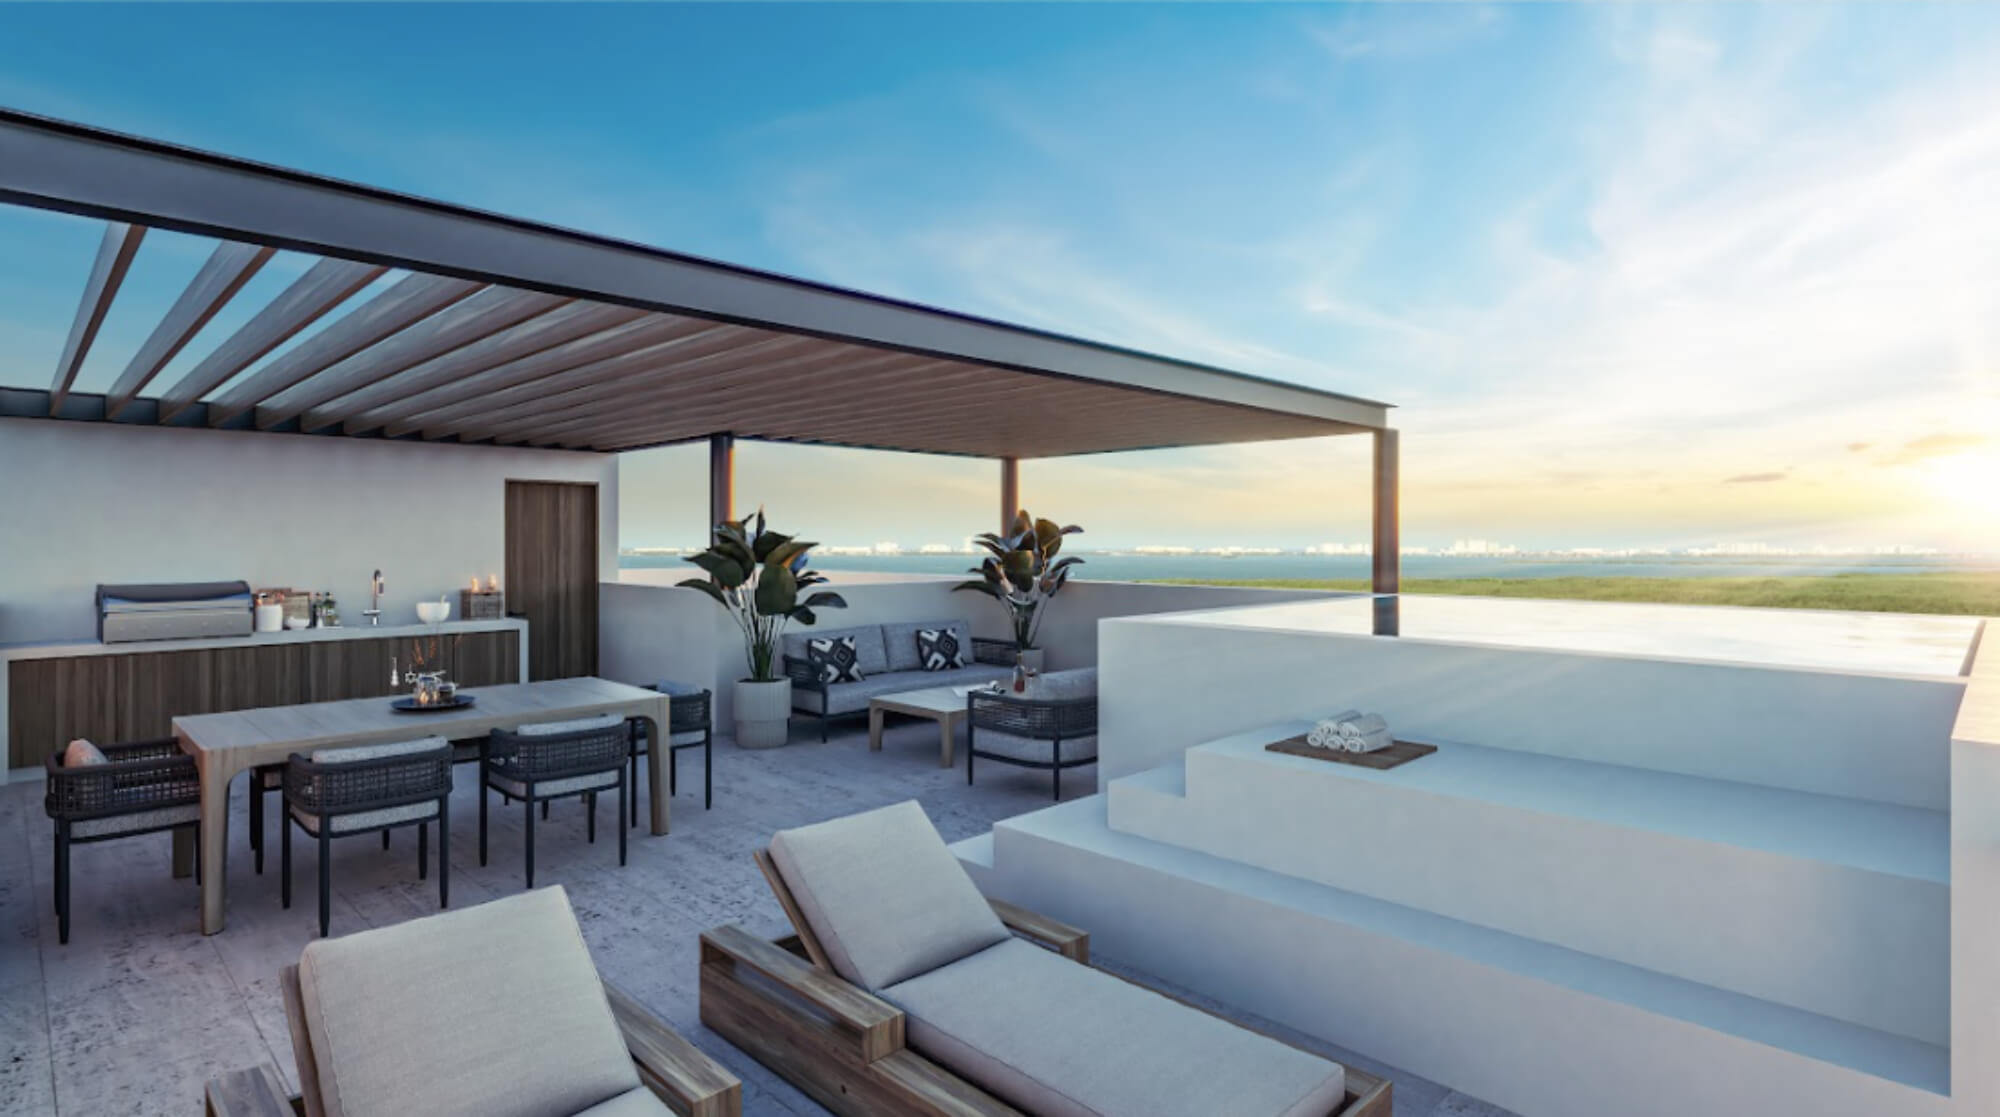 Penthouse with Sky-lounge, infinity pool and Beach Cabins, pre-construction